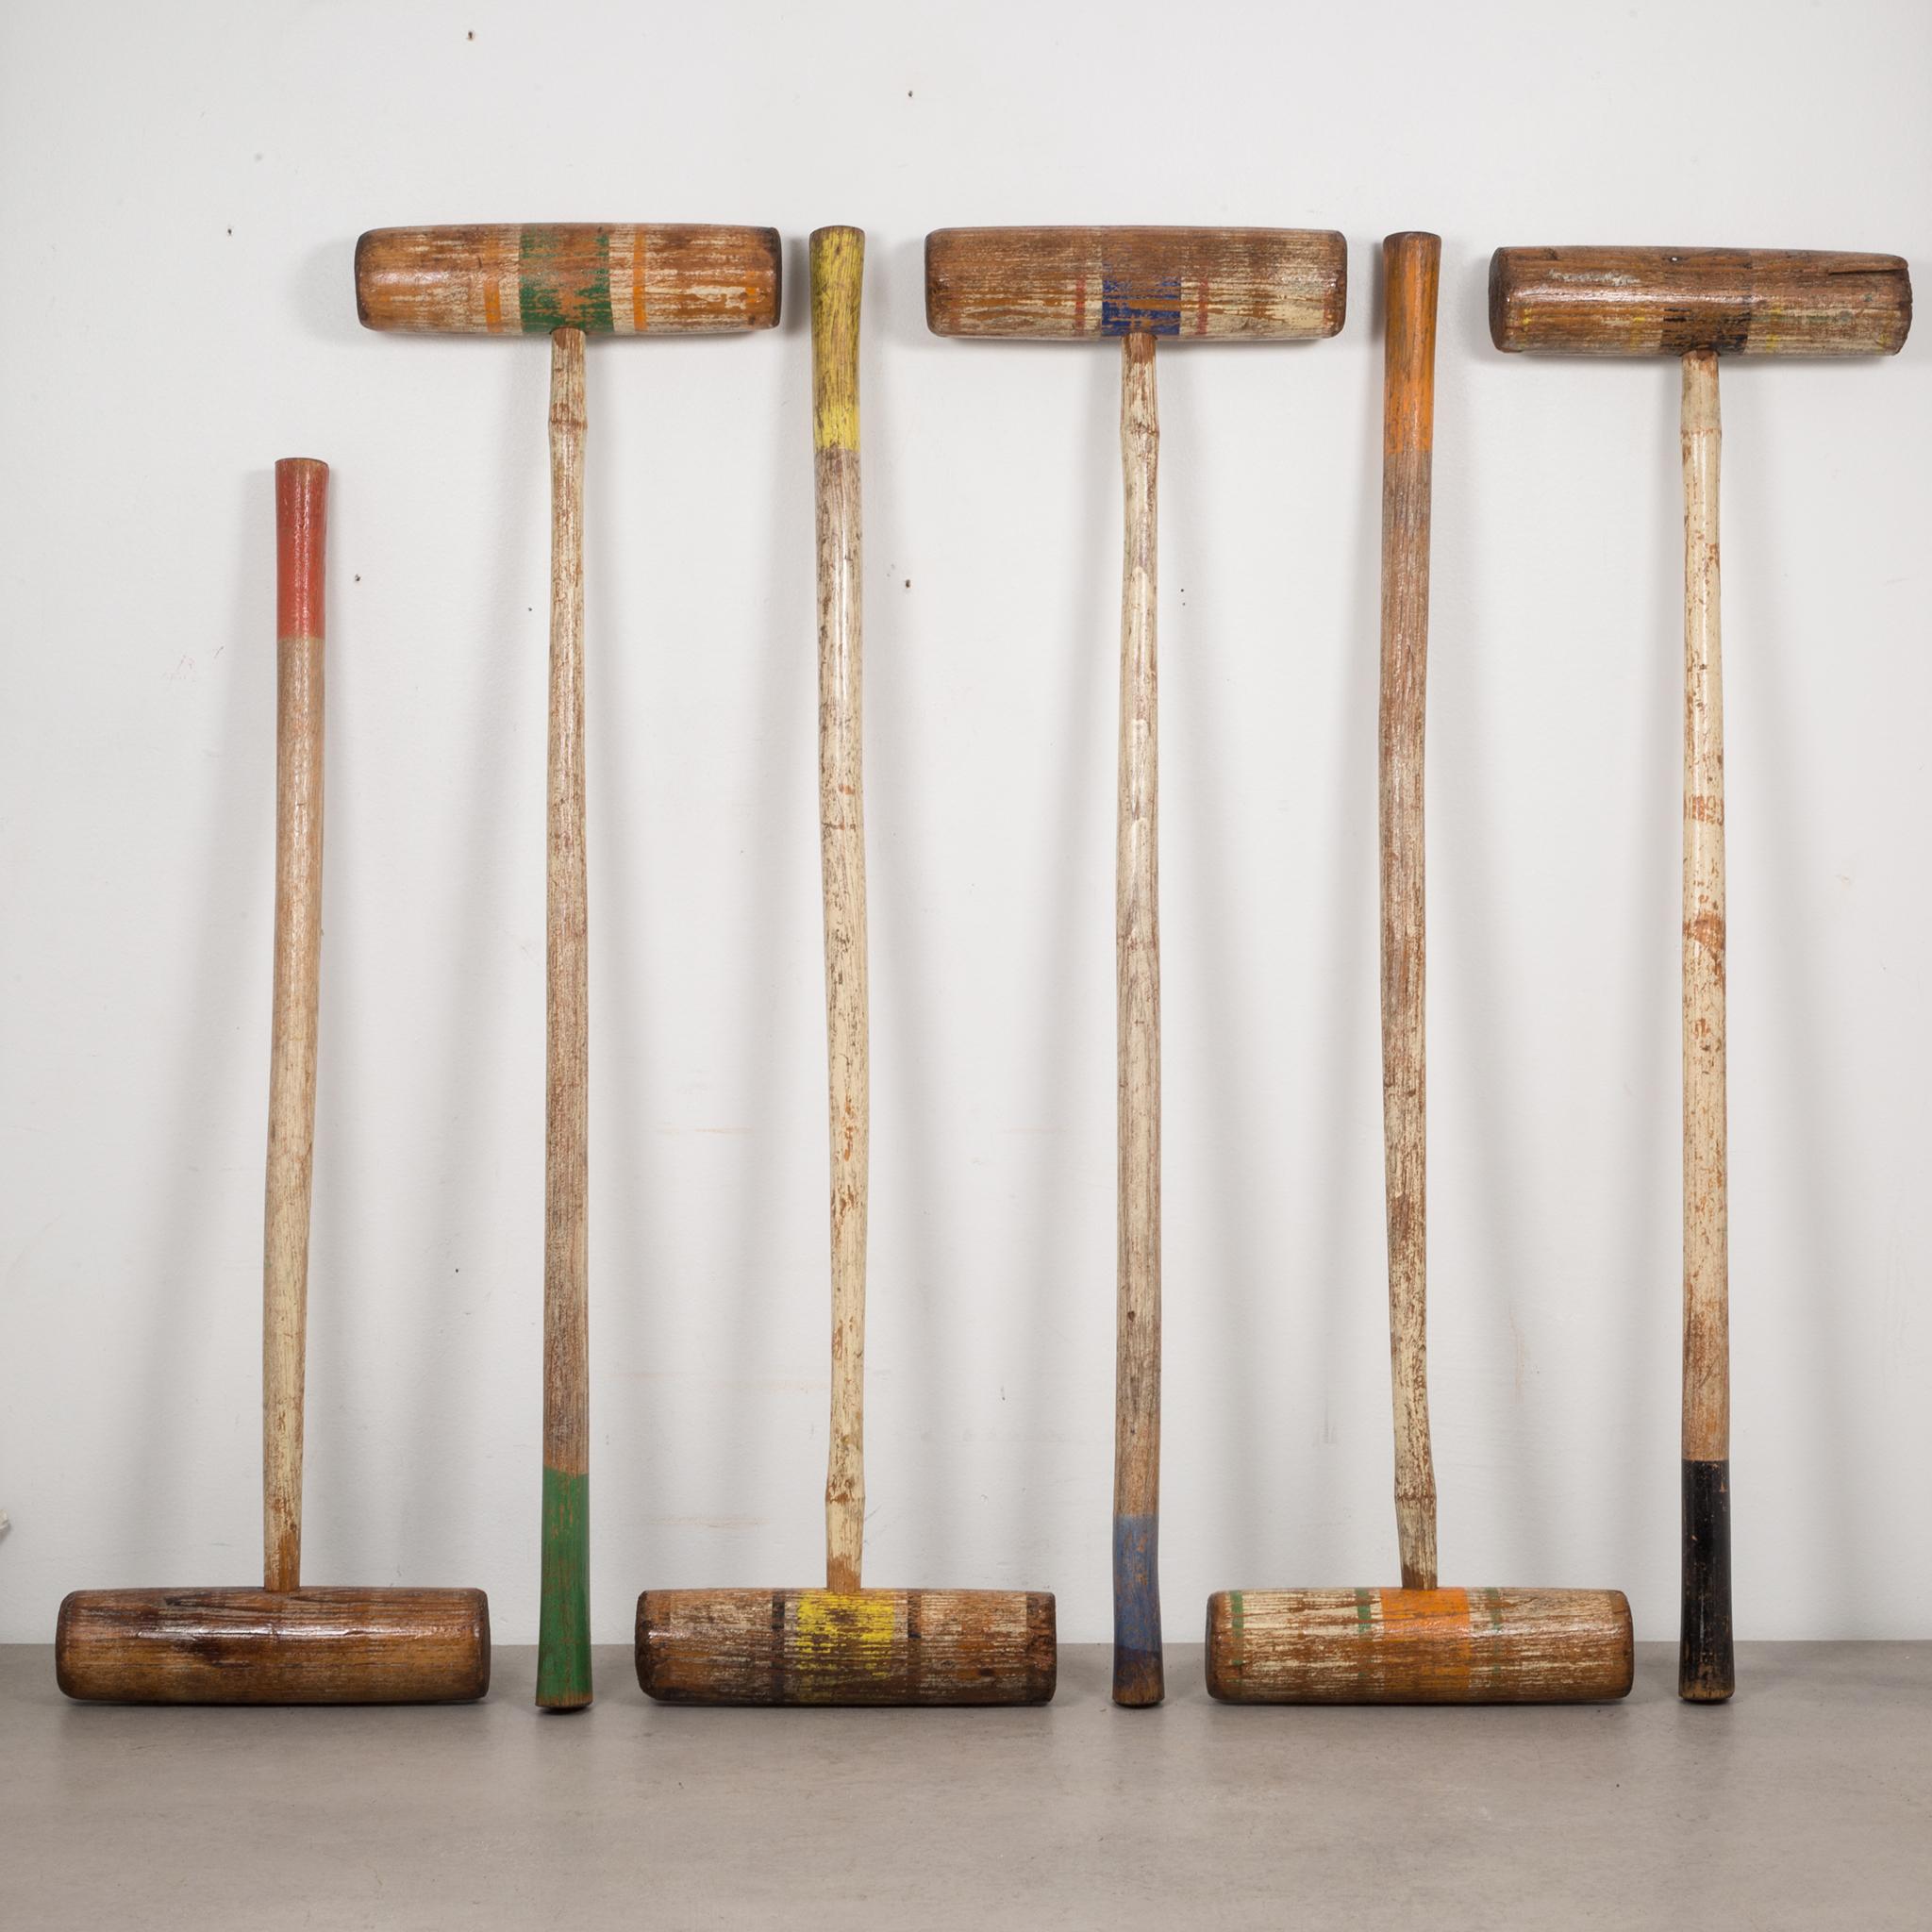 About

An early 20th century wooden croquet set with 6 mallets, original rack, two stakes and 3 balls.

Creator Unknown.
Date of manufacture circa 1940.
Materials and techniques painted wood.
Condition good. Wear consistent with age and use.